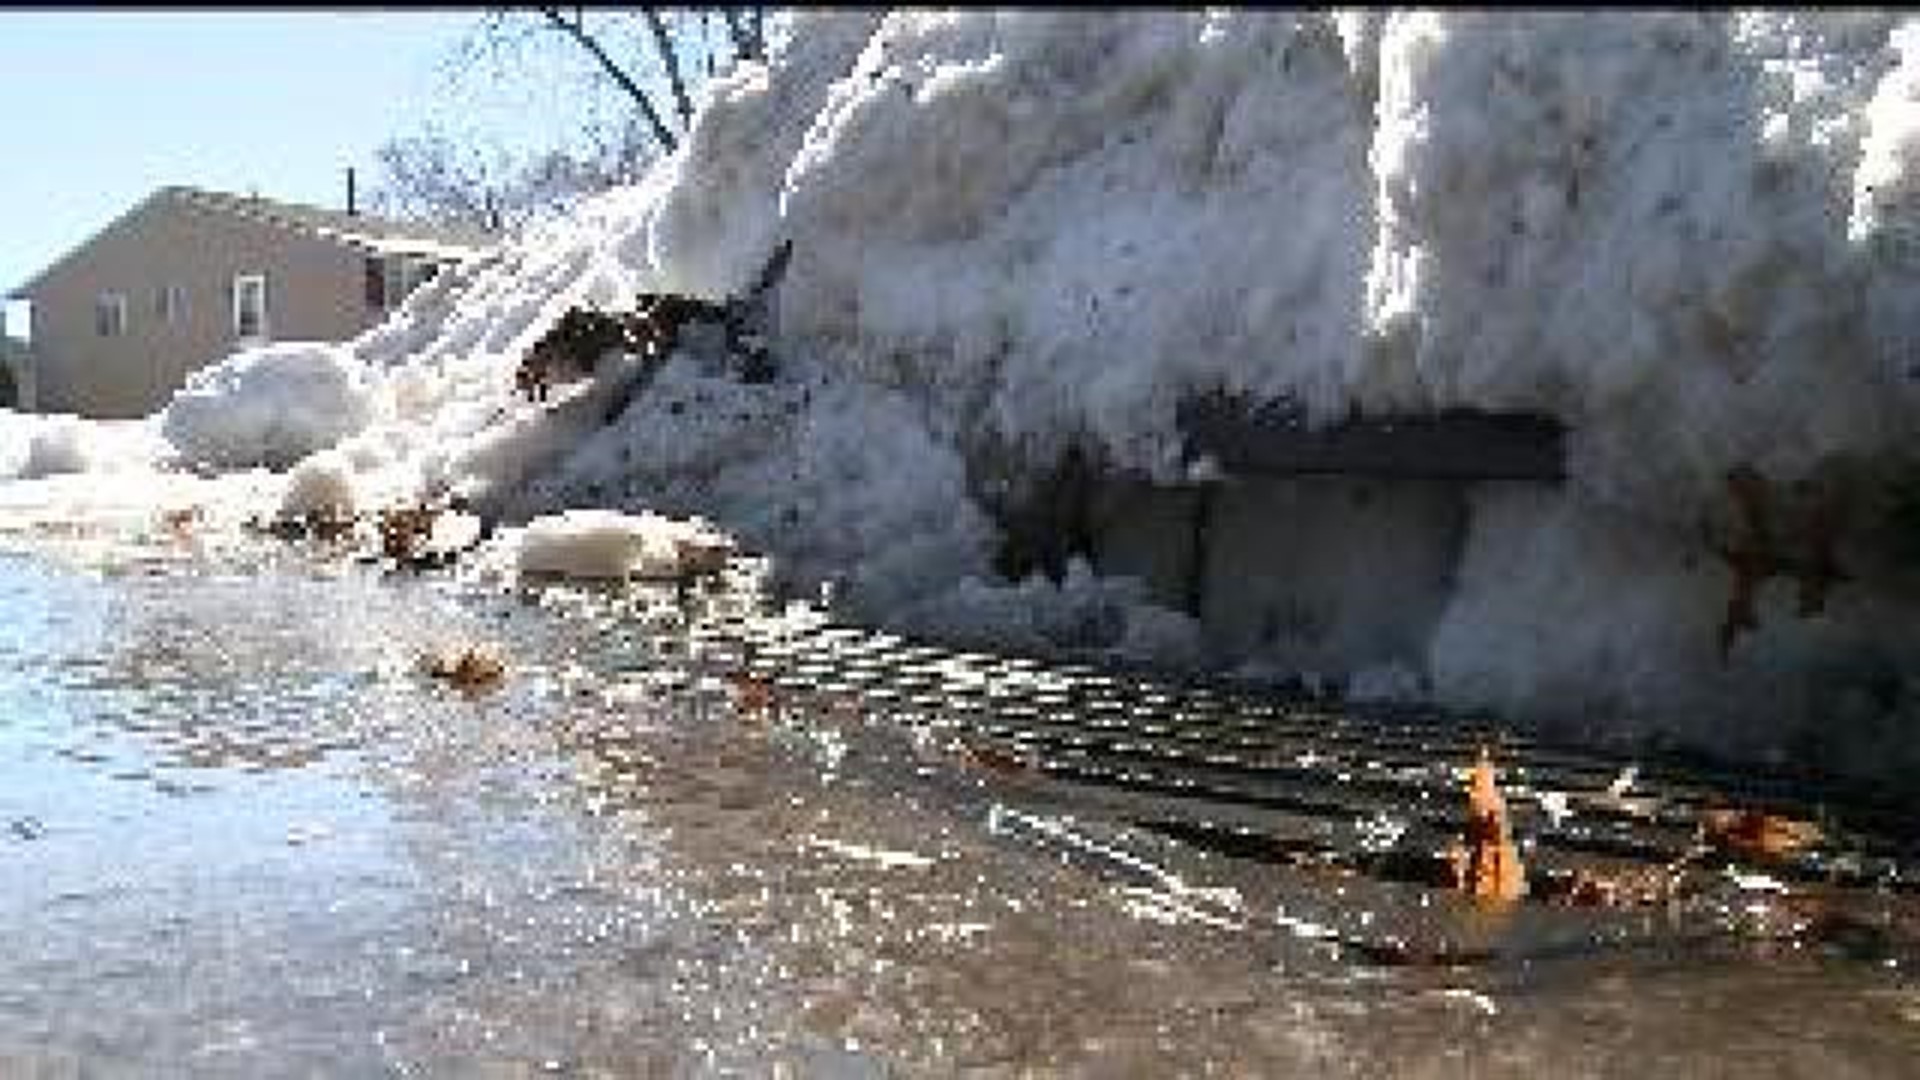 Snow melts and streets flood in Quad Cities